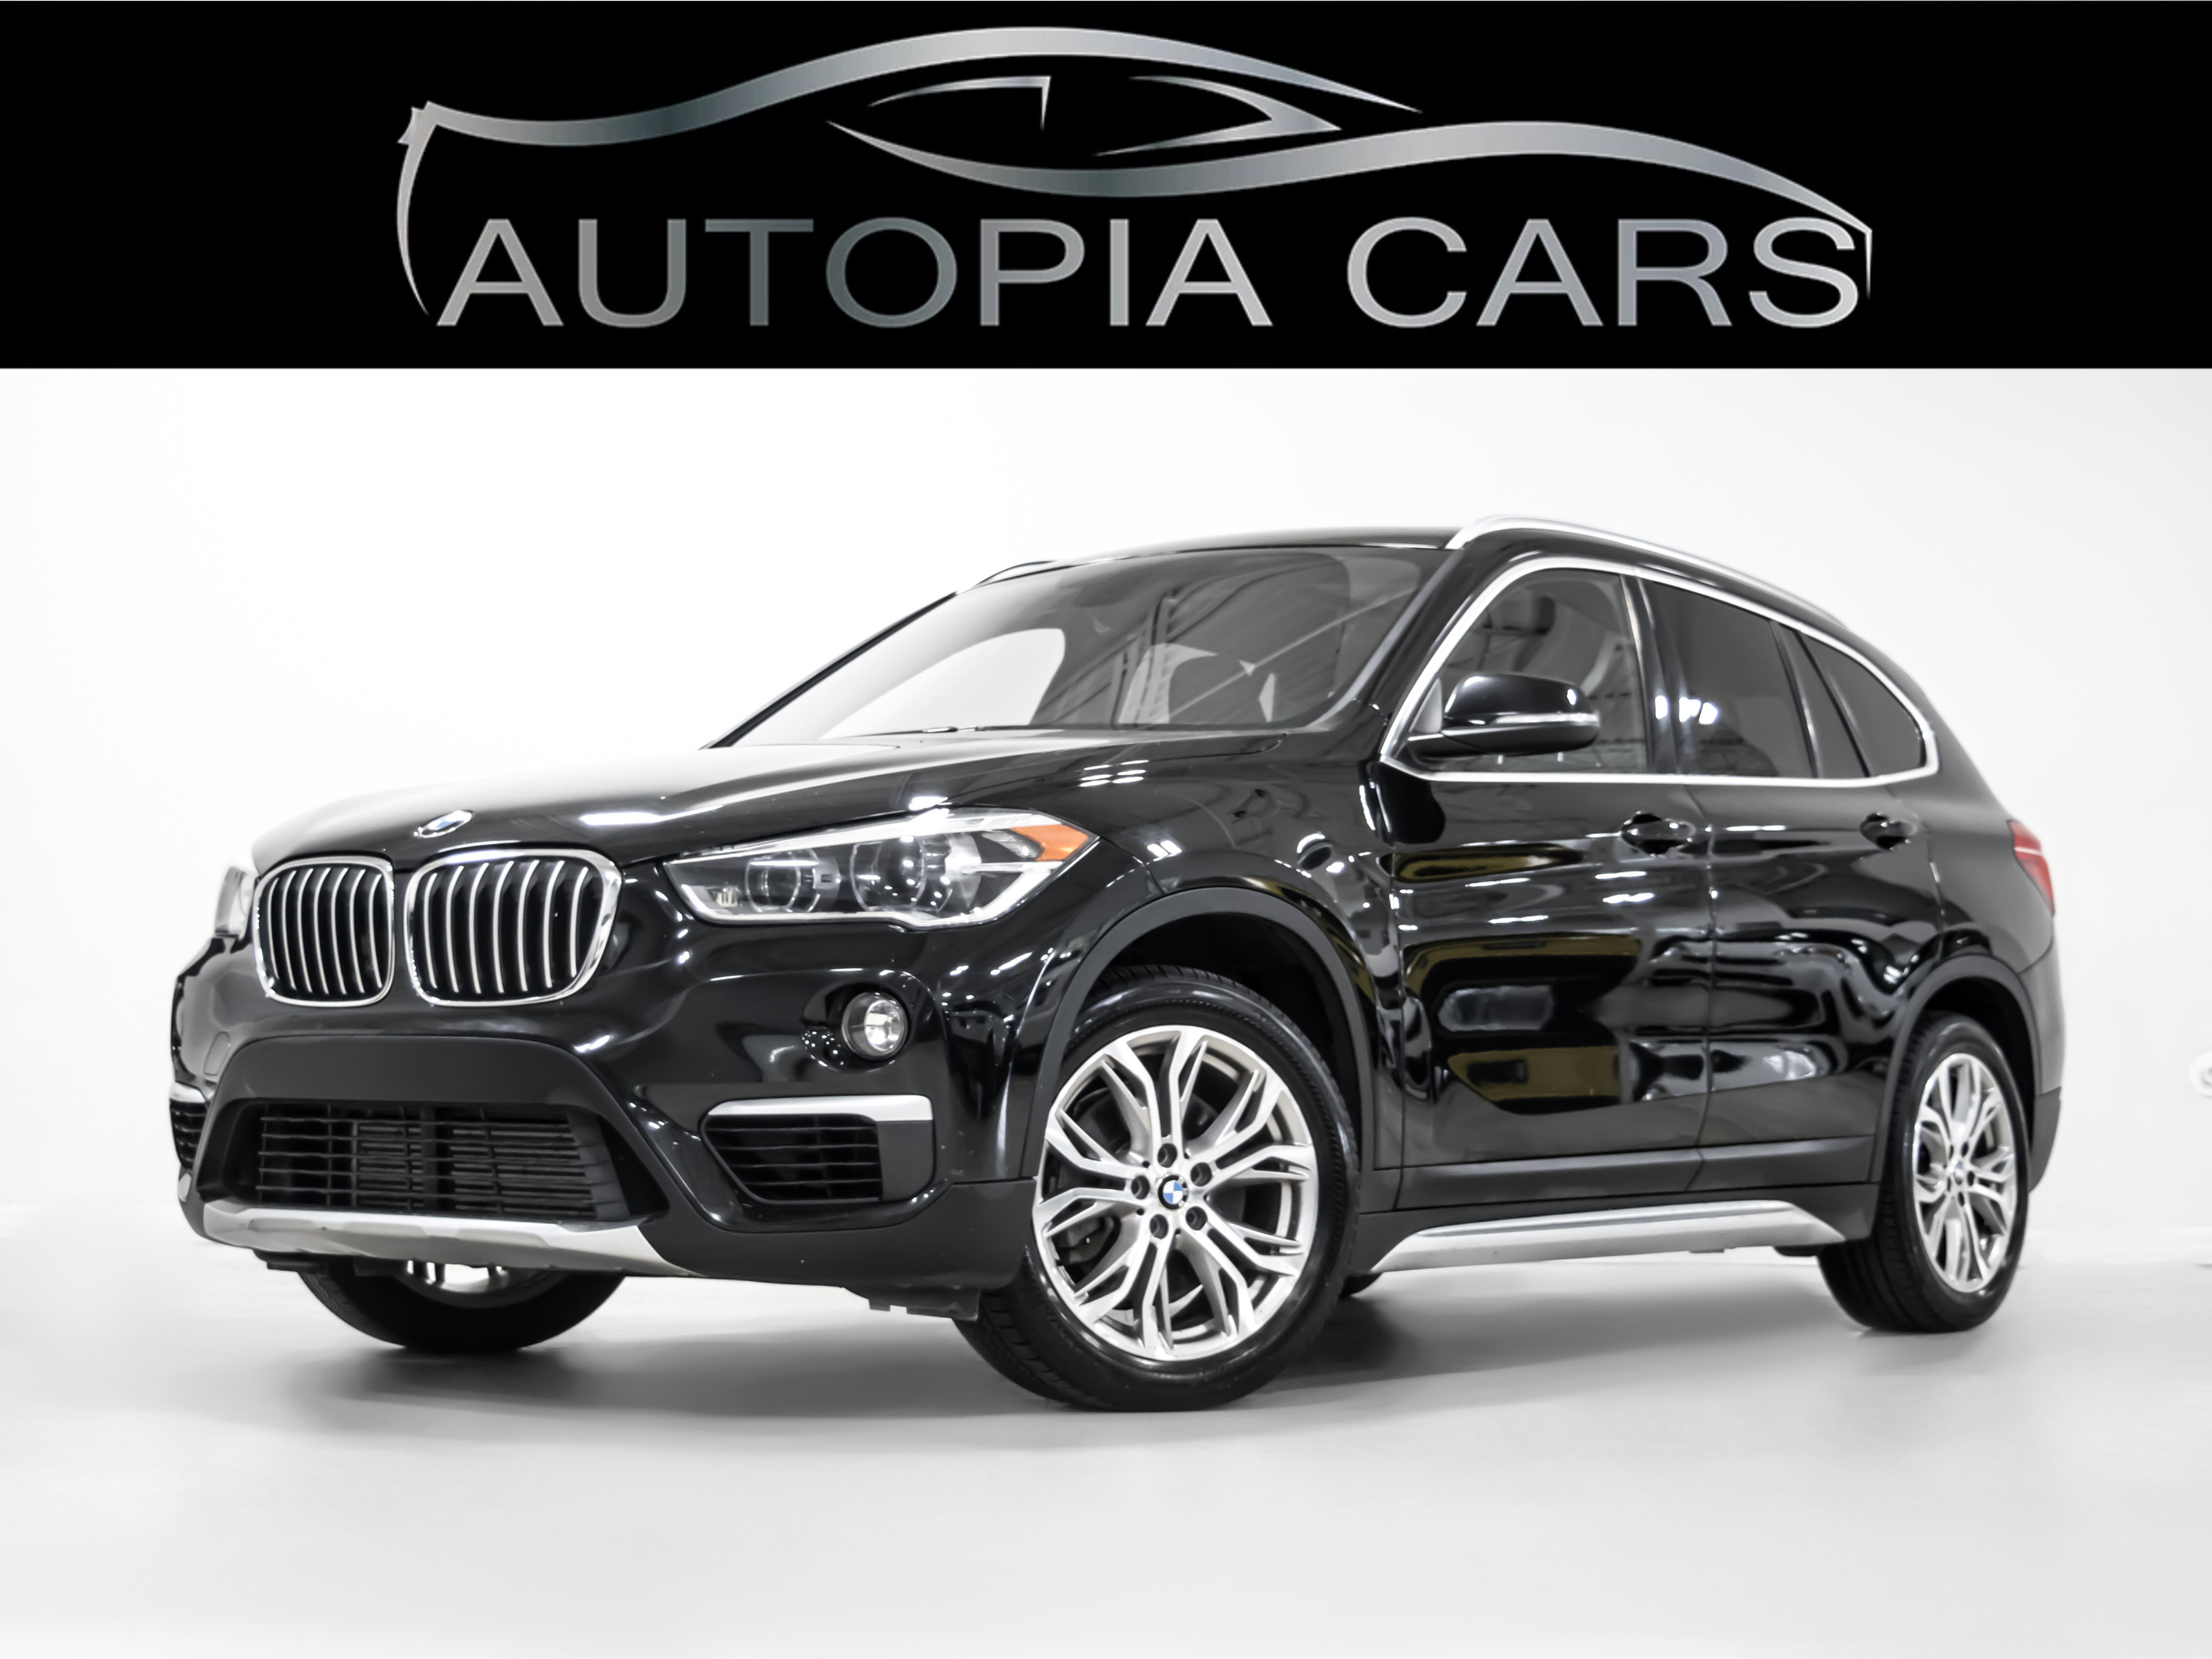 2018 BMW X1 Low kms, Premium Sport, Panoroof, No accidents